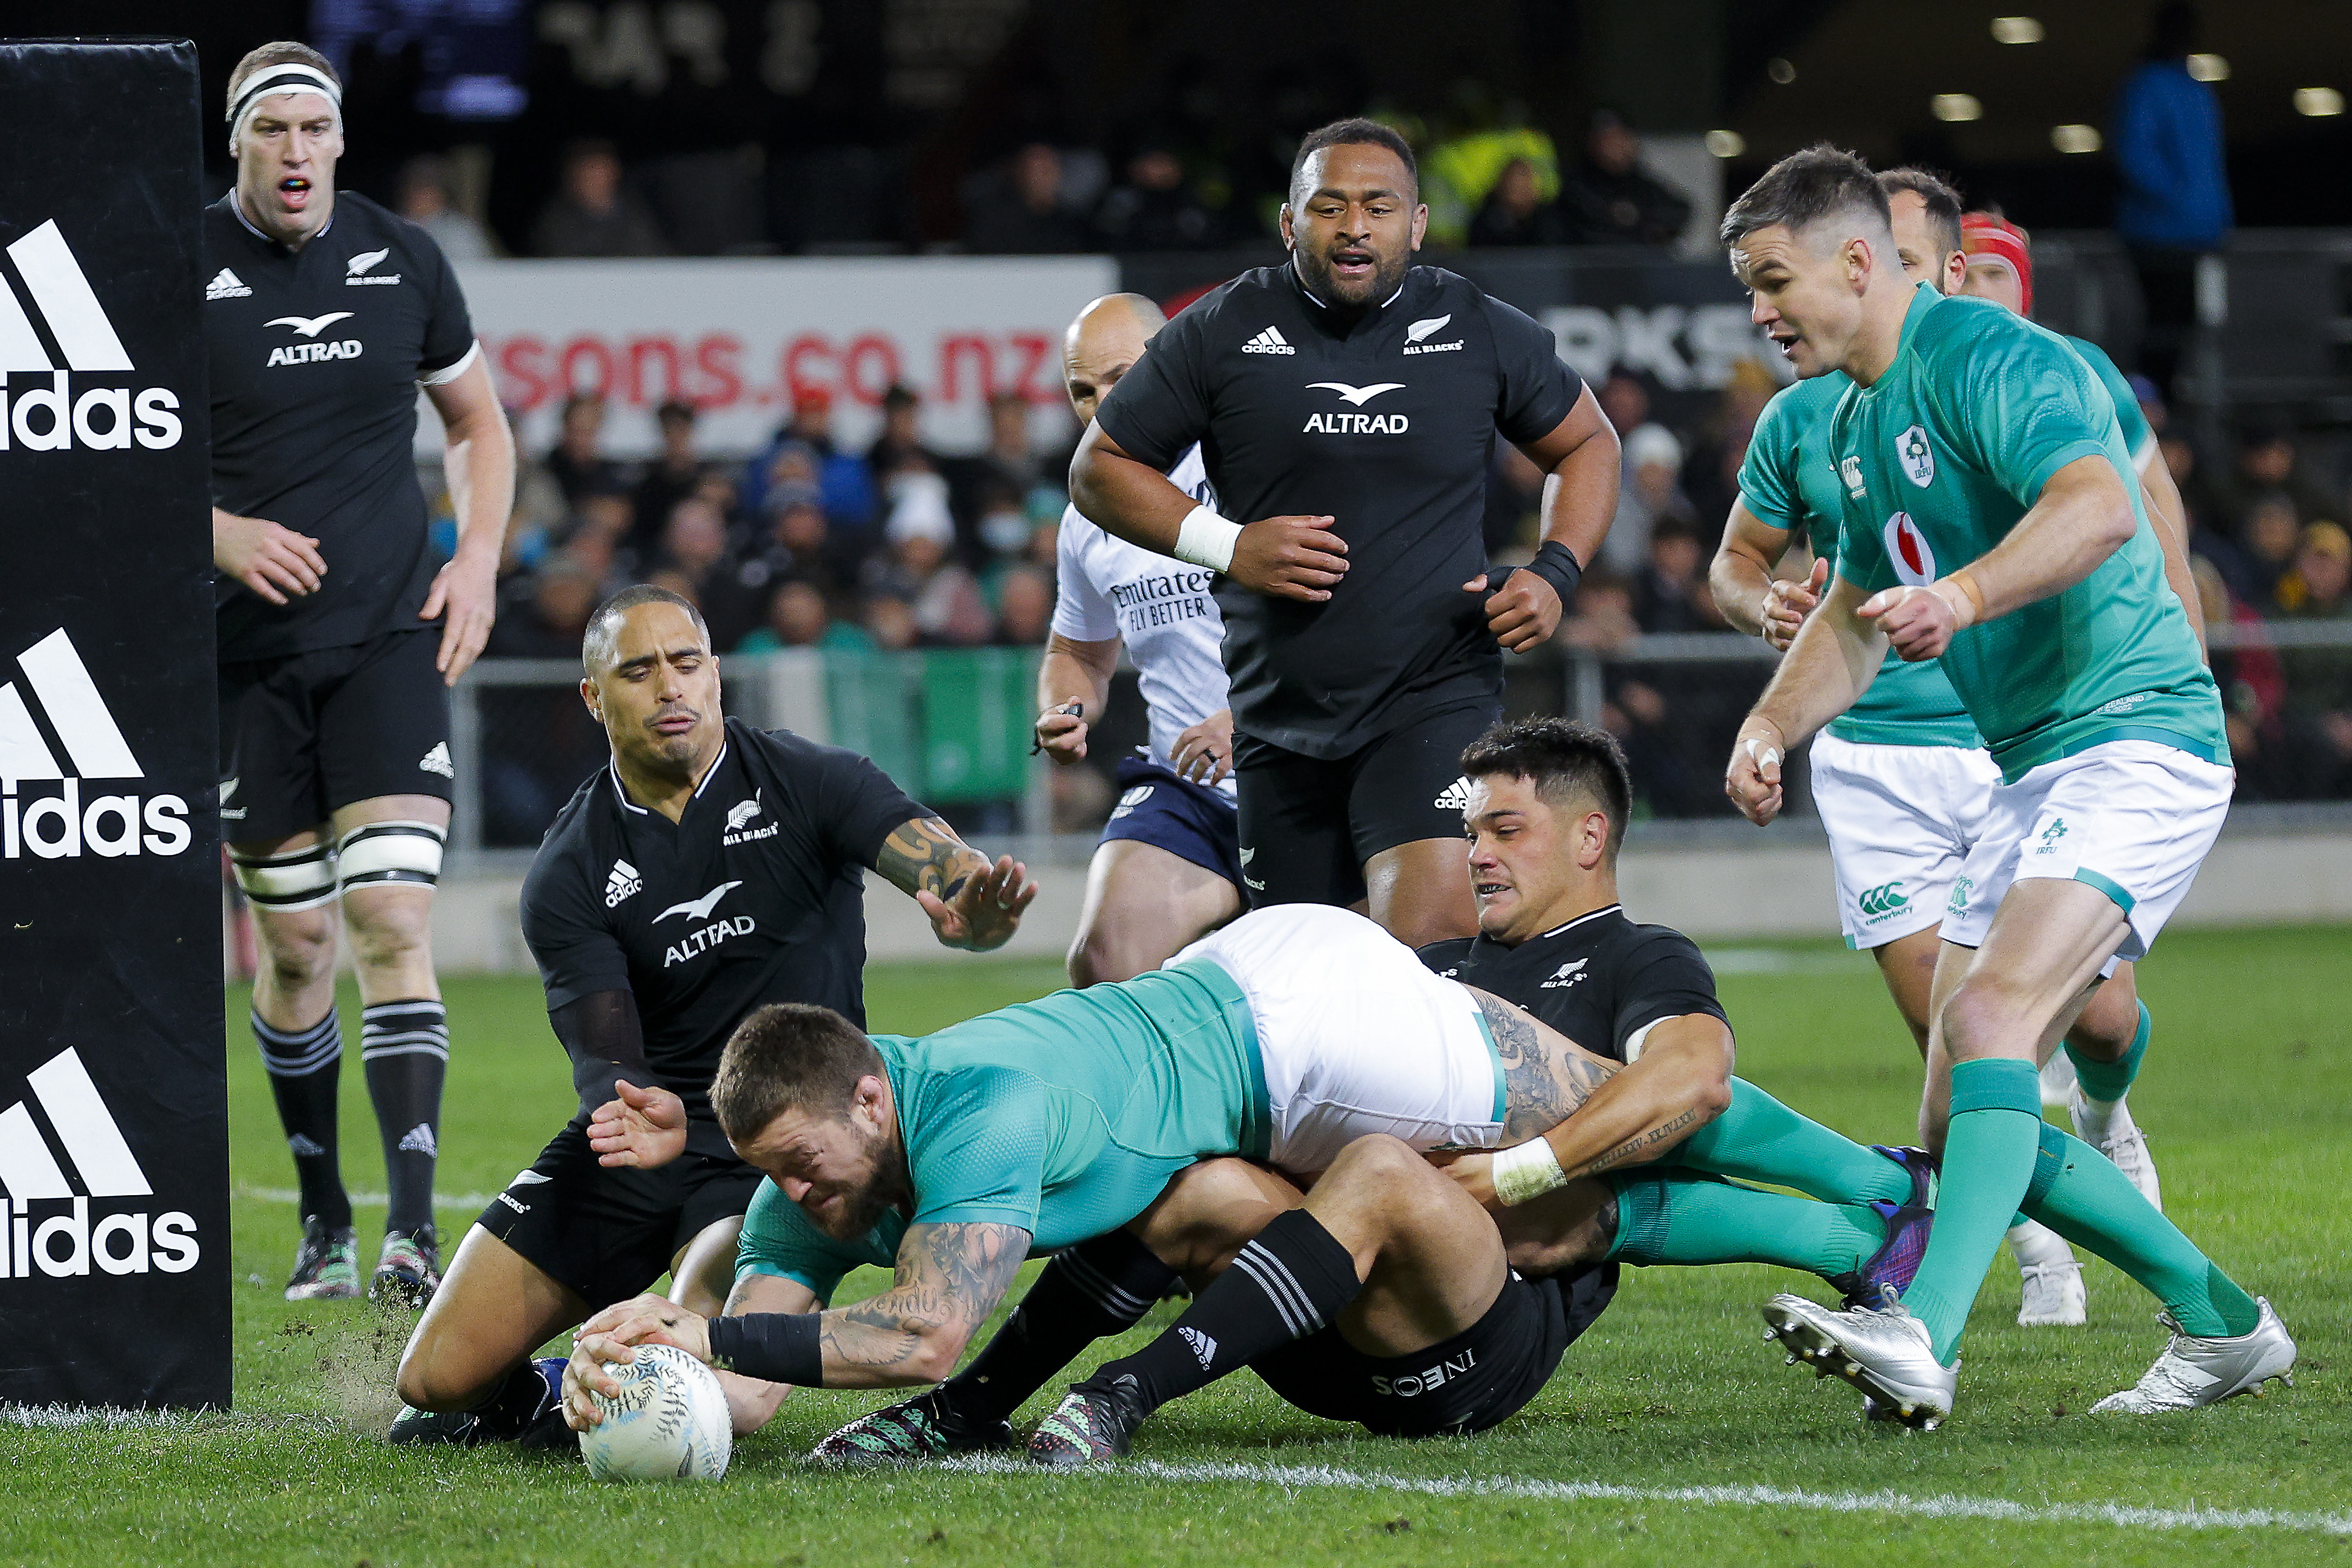 Ireland beat All Blacks in New Zealand for the first time